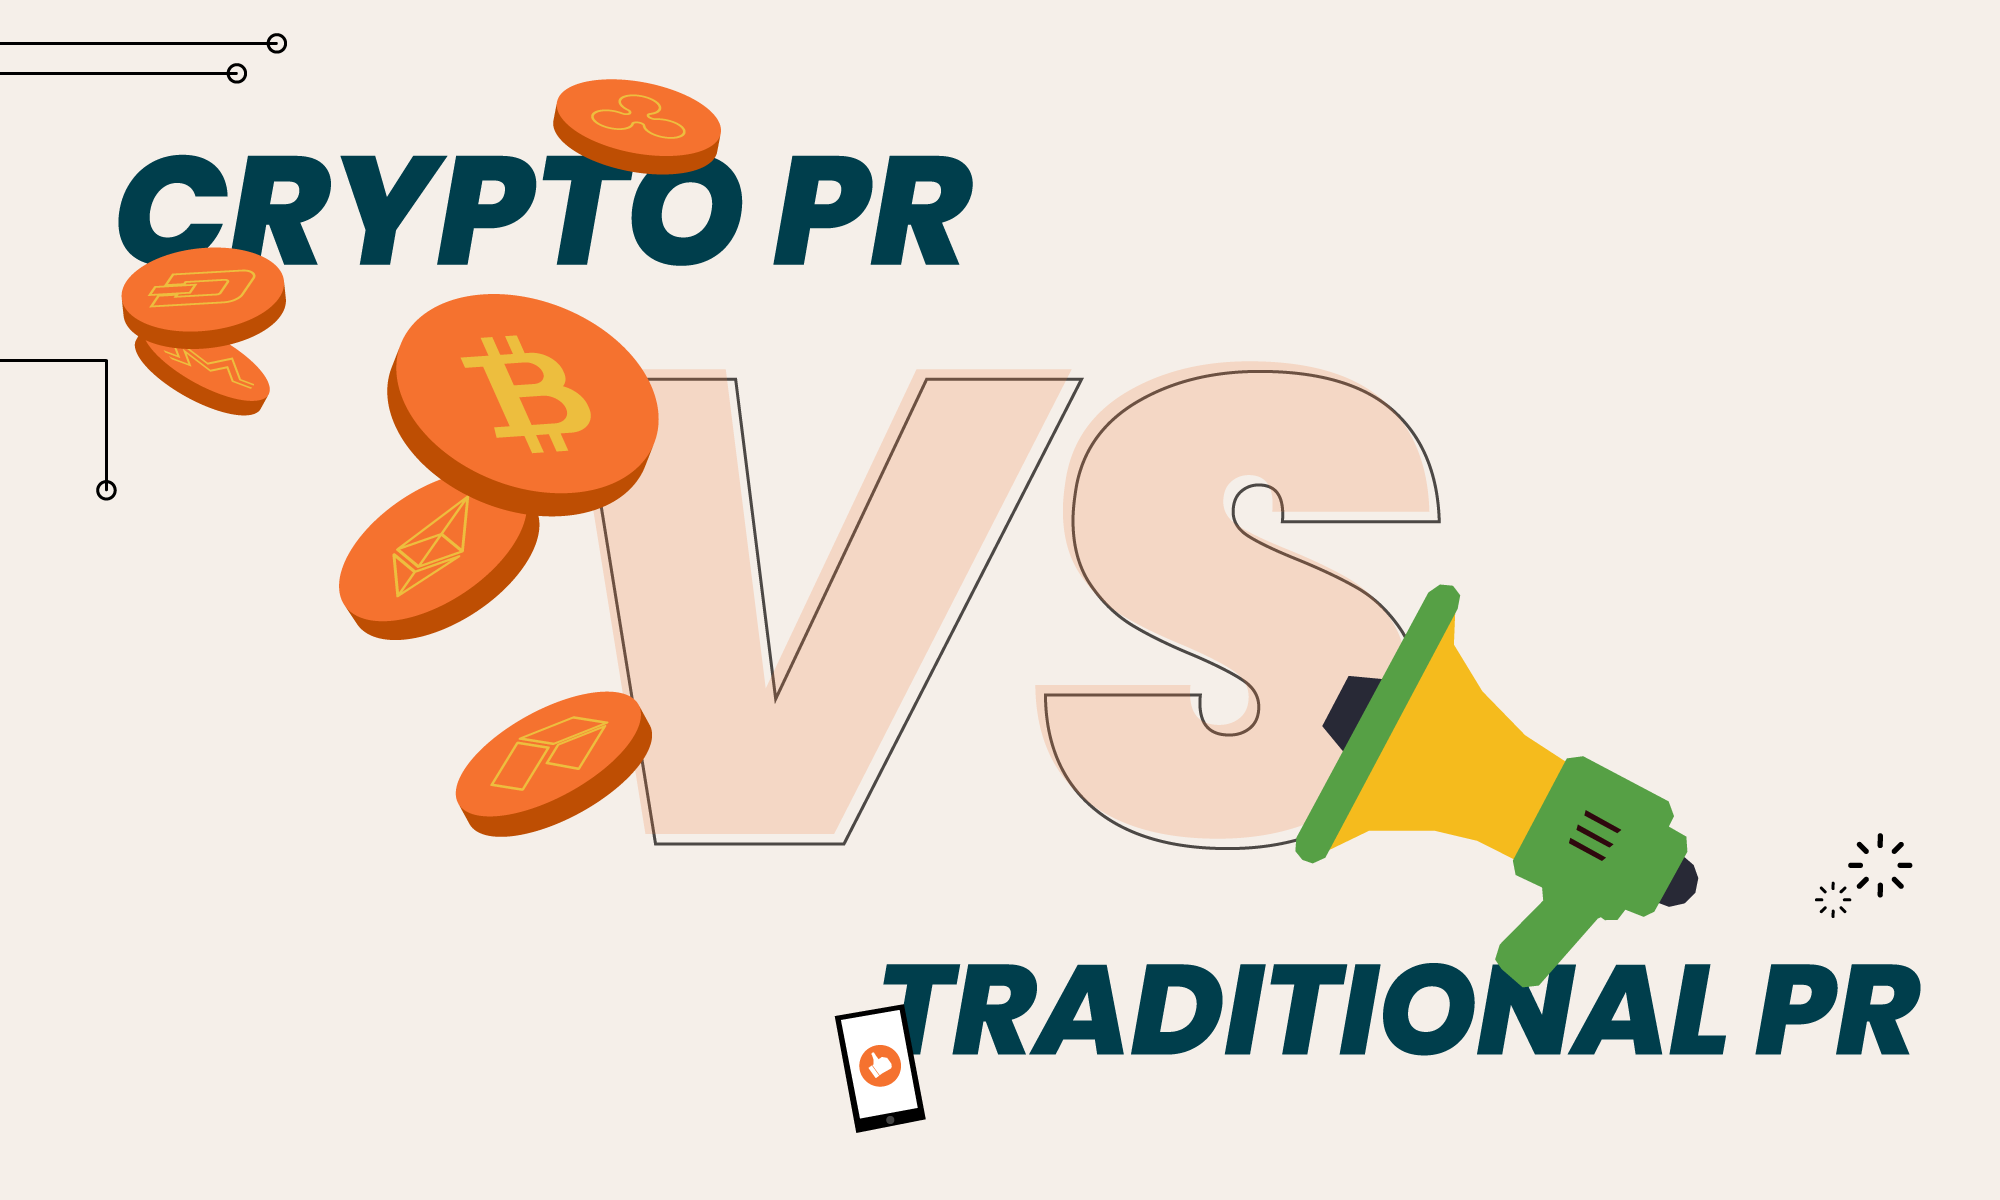 Crypto PR Vs. Traditional PR - What's The Difference?